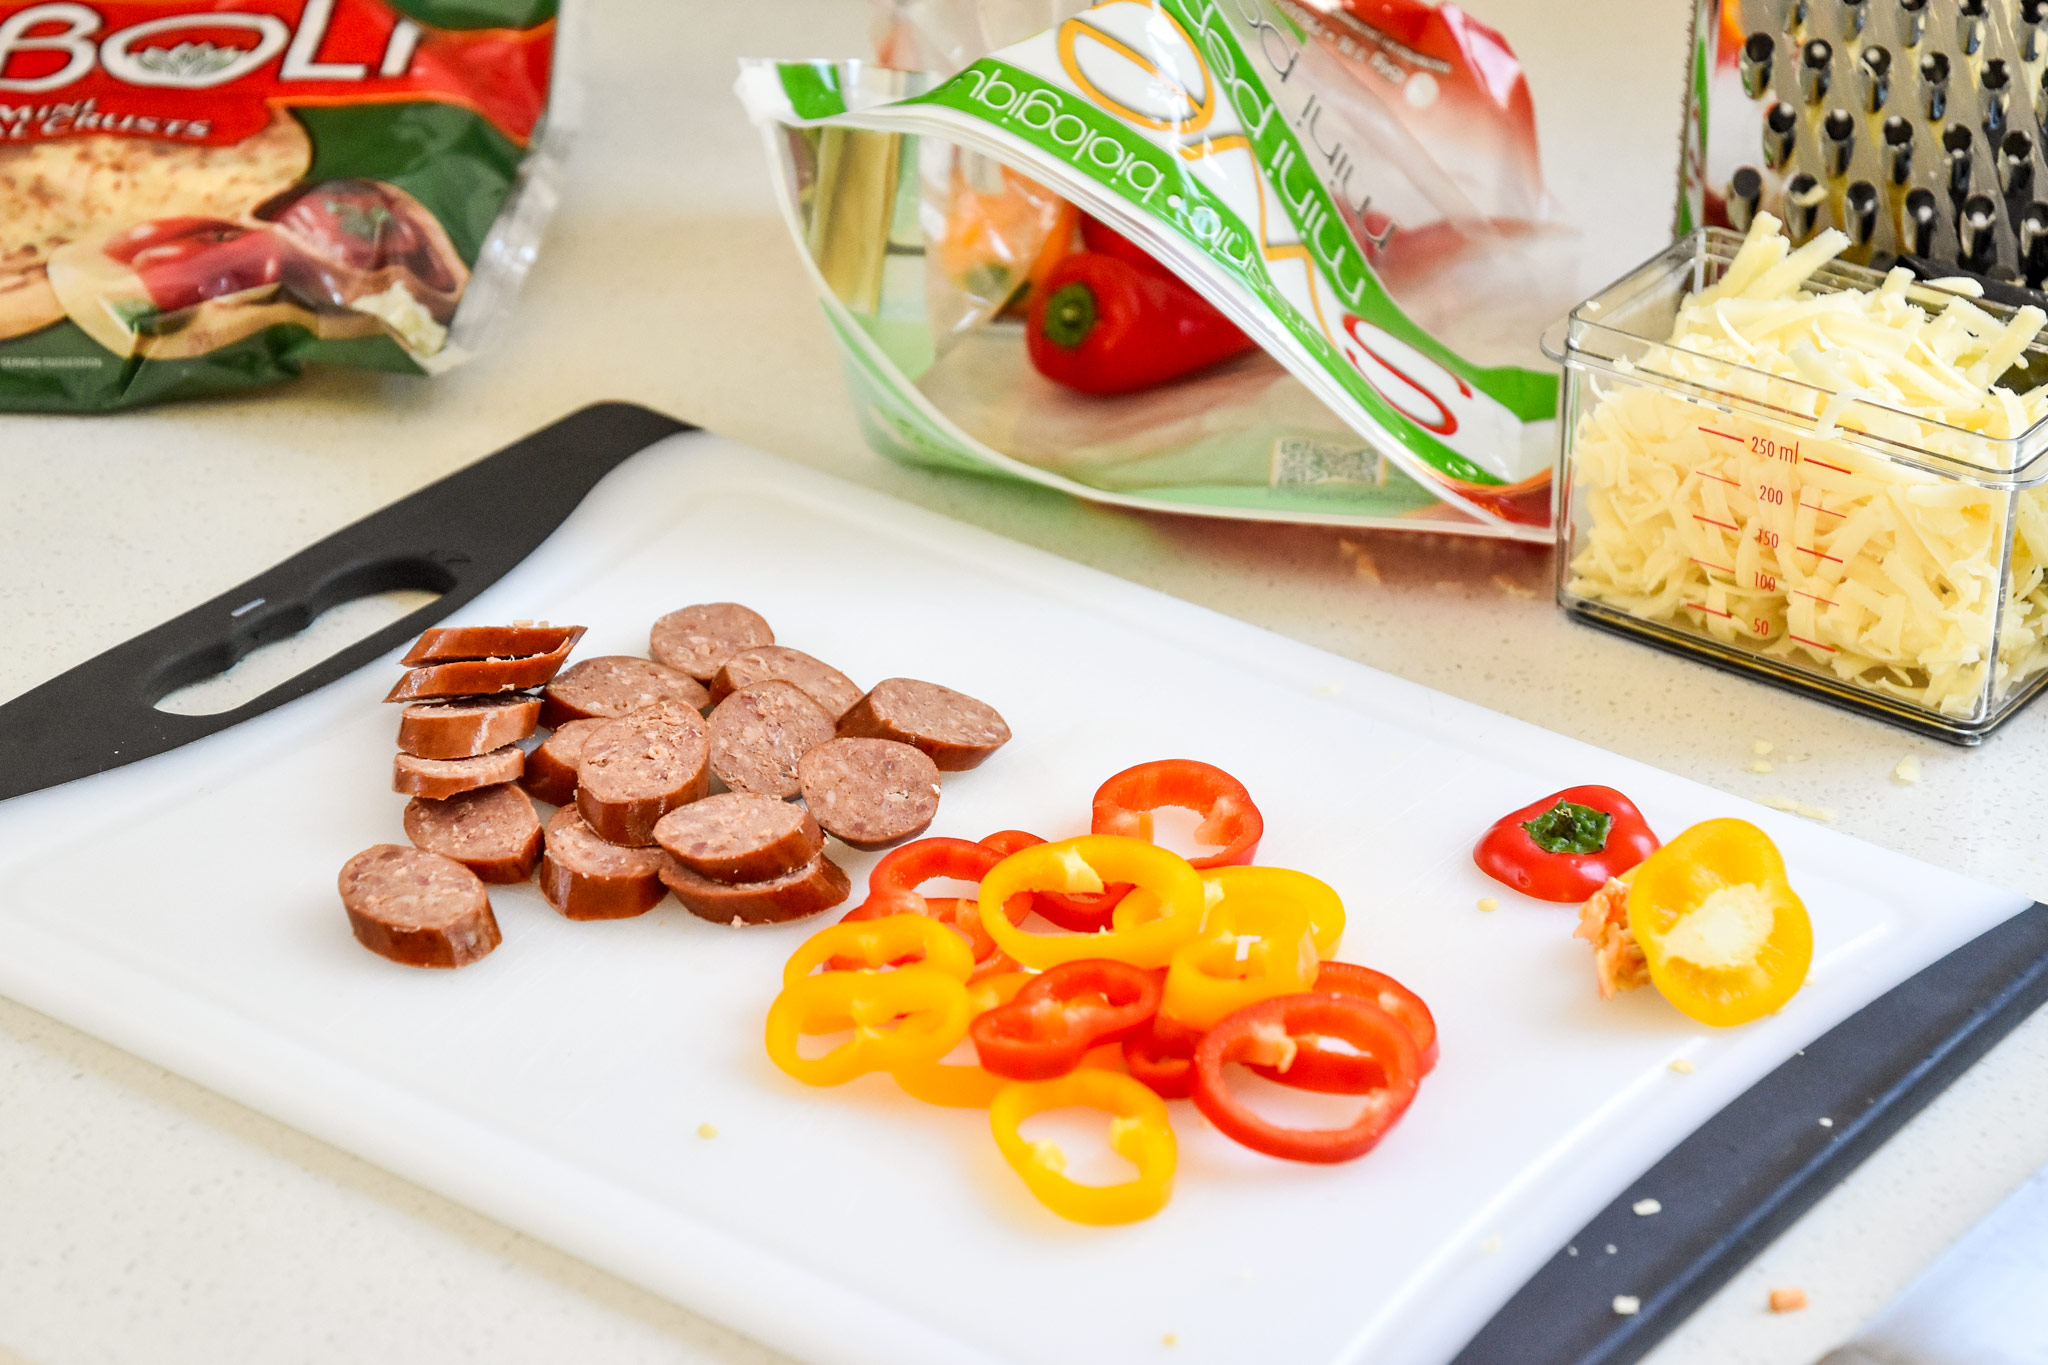 Ingredients for the sausage and pepper personal pizzas being cut on a cutting board